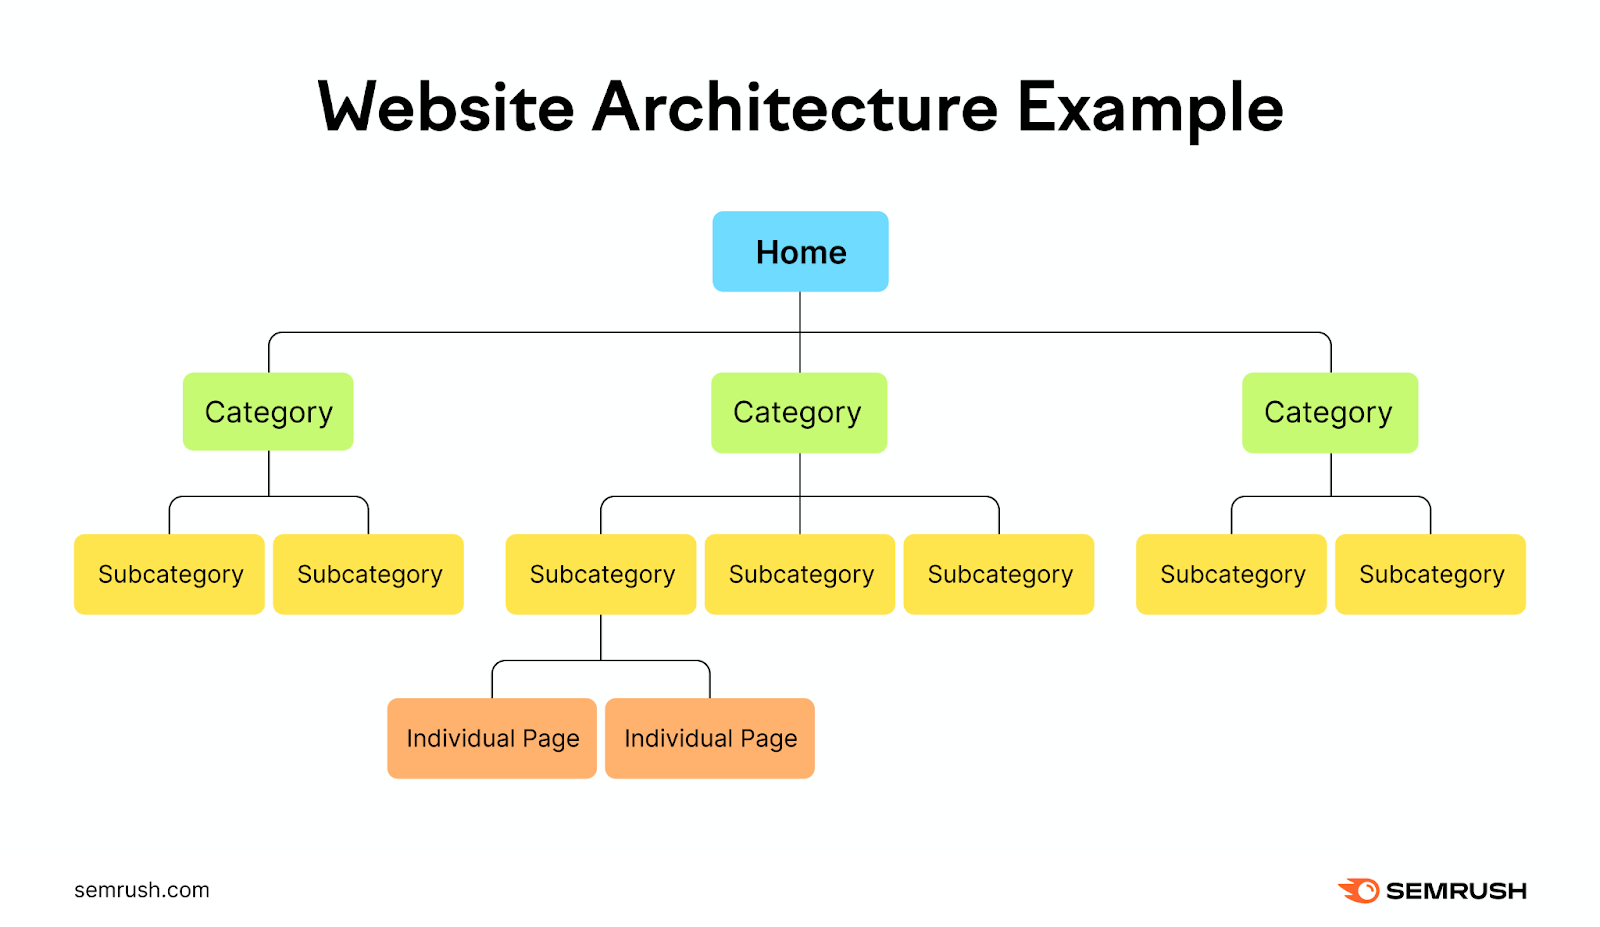 Website architecture example has a few category pages that each branch into subcategory pages. These then branch into individual pages.